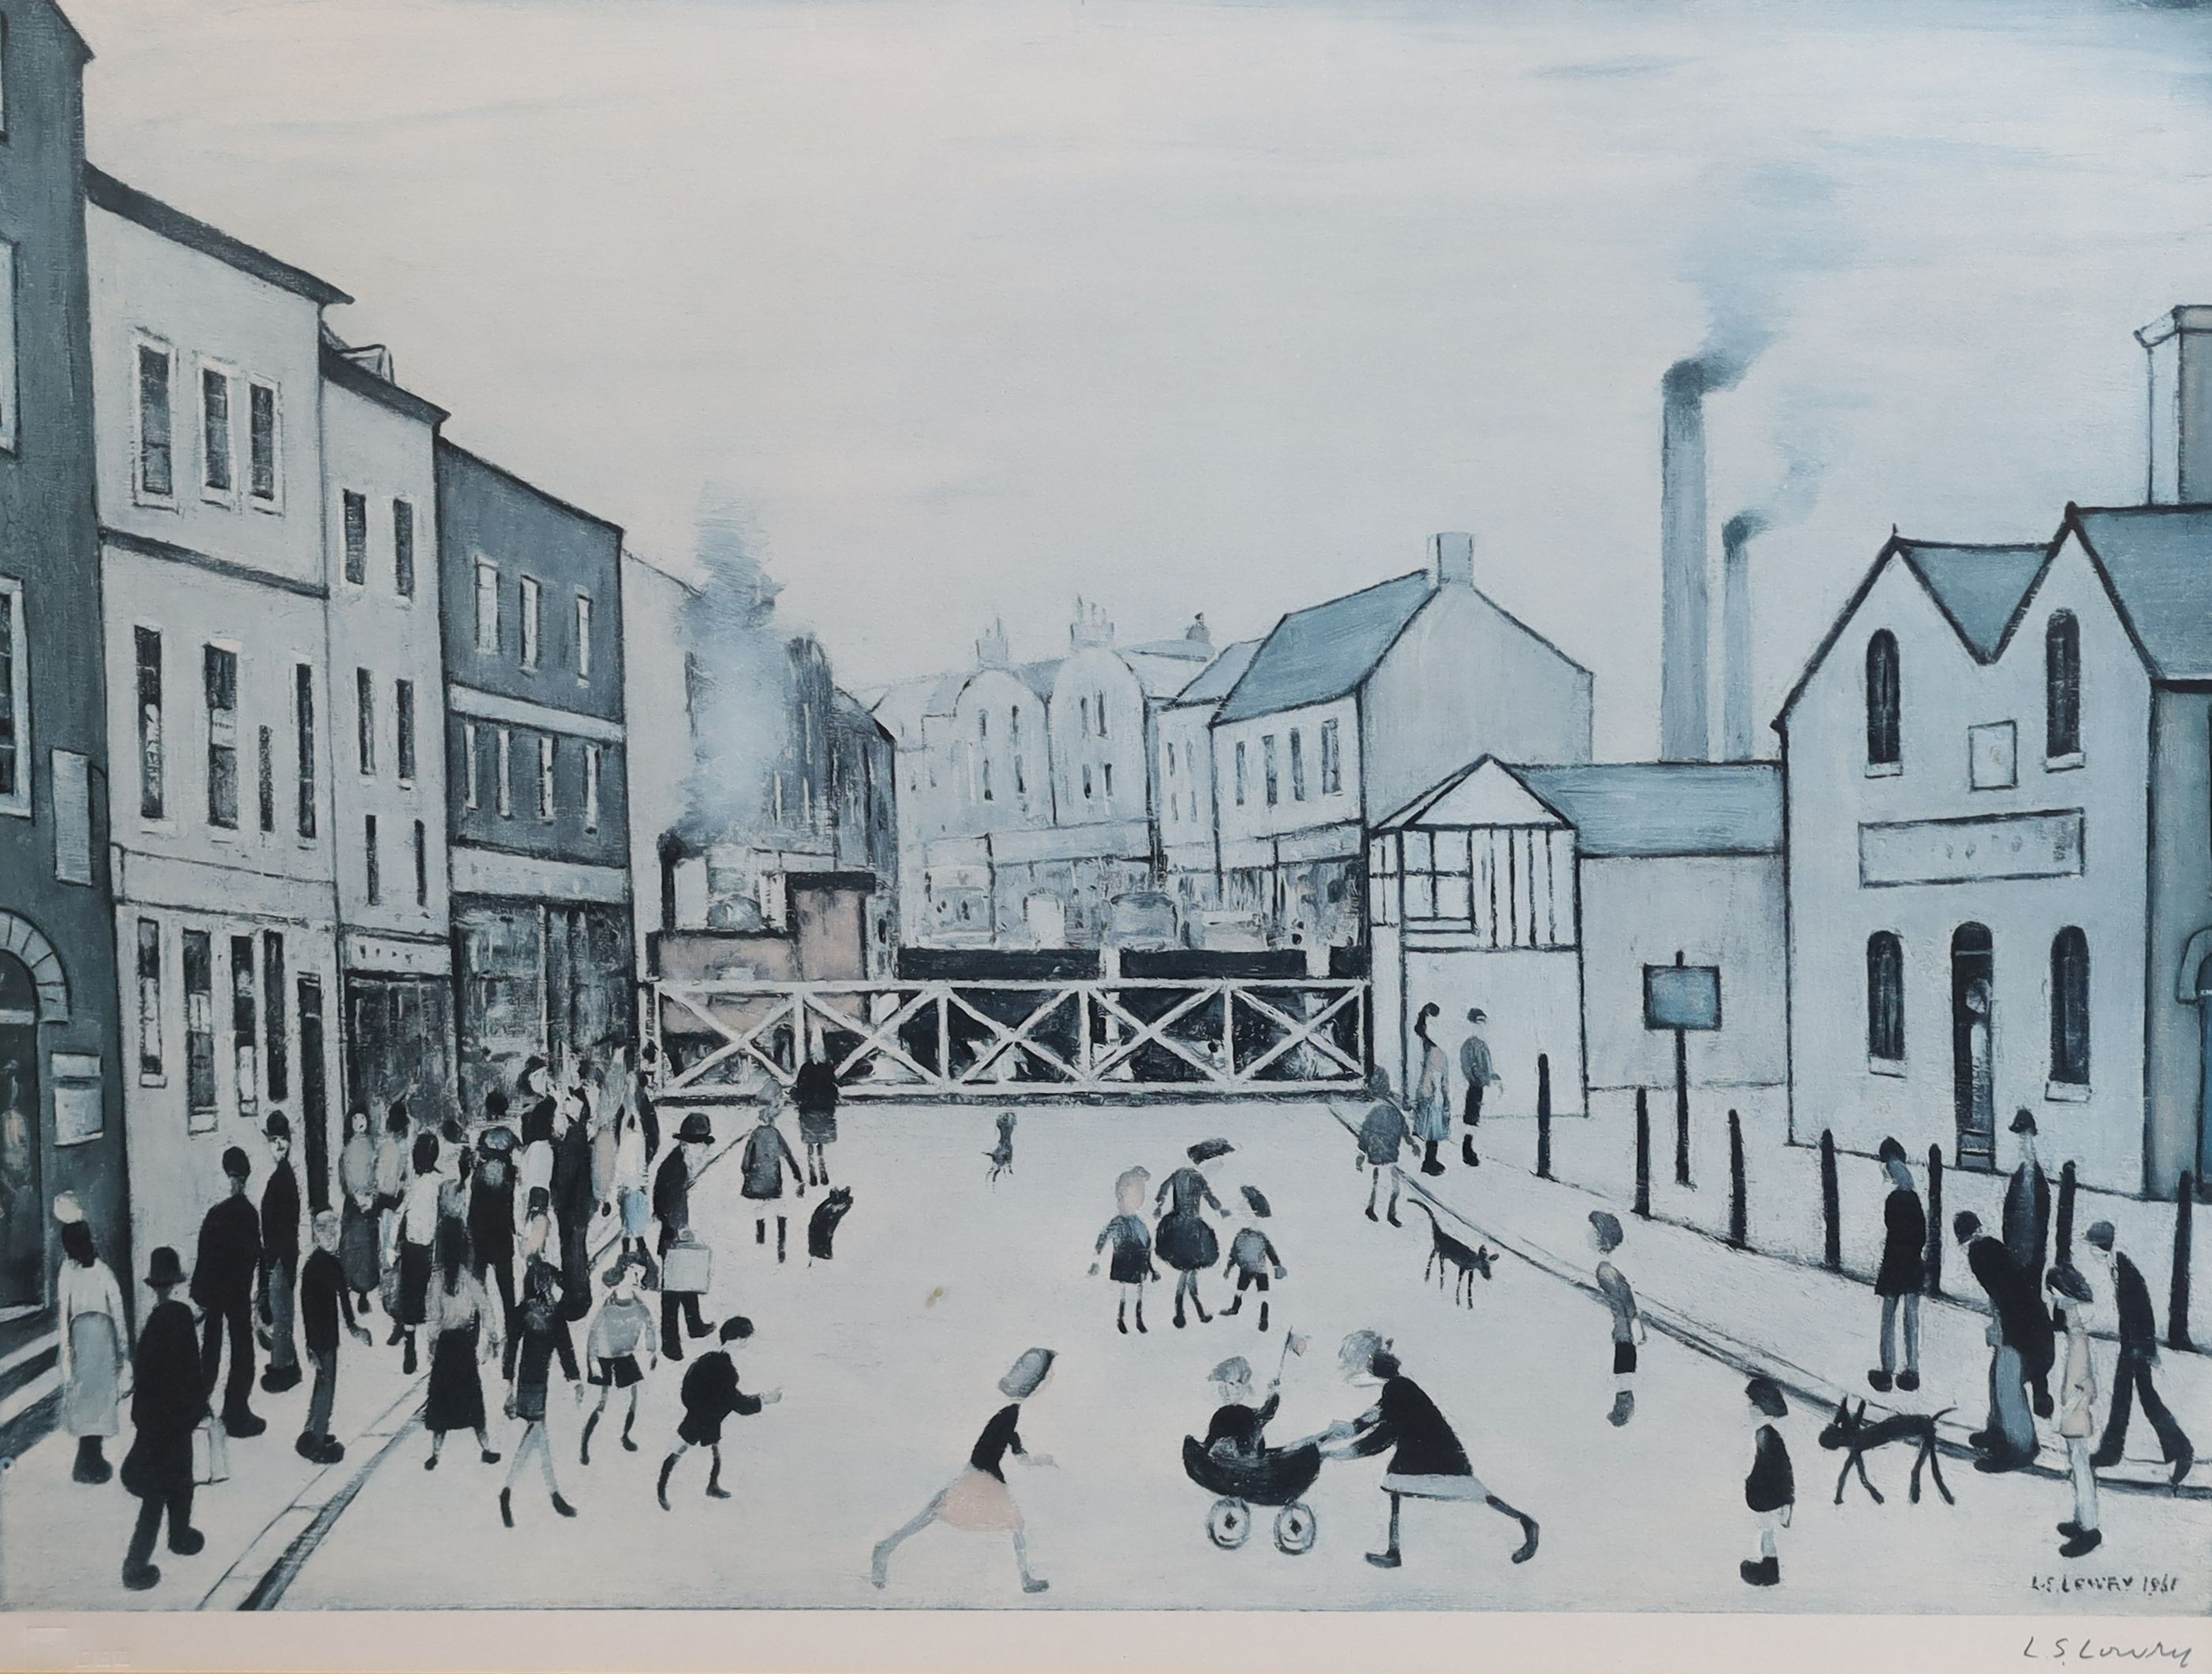 Lawrence Stephen Lowry (1887-1976), 'The Level Crossing', offset lithograph, 44 x 58cm